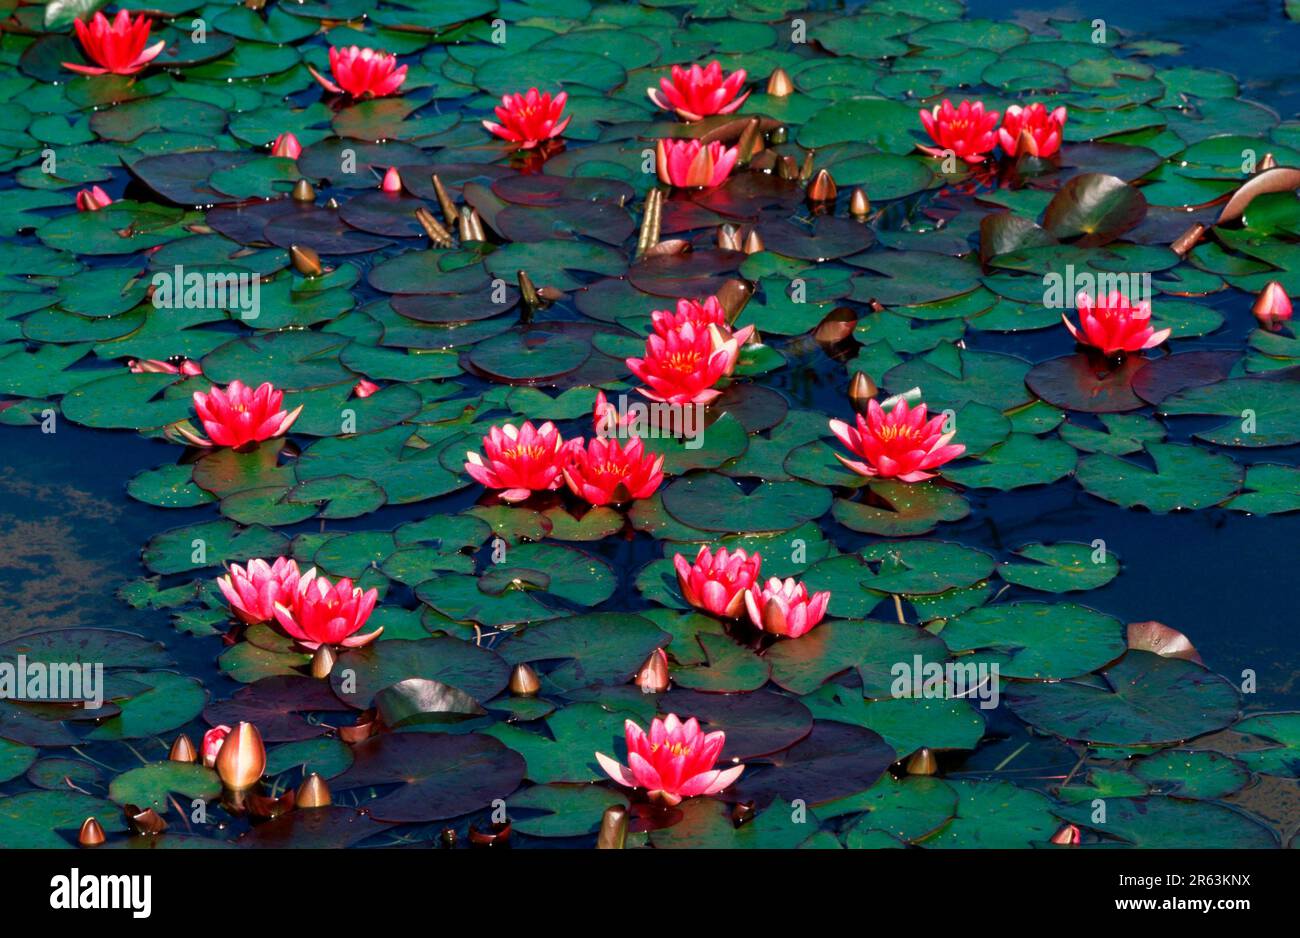 Water Lilies (Nymphaeaceae) 'Rene Gerard' (Nymphaea hybrid), Water Lilies 'Rene Gerard' (plants) (aquatic plant) (water lily family) (flowering ing) Stock Photo